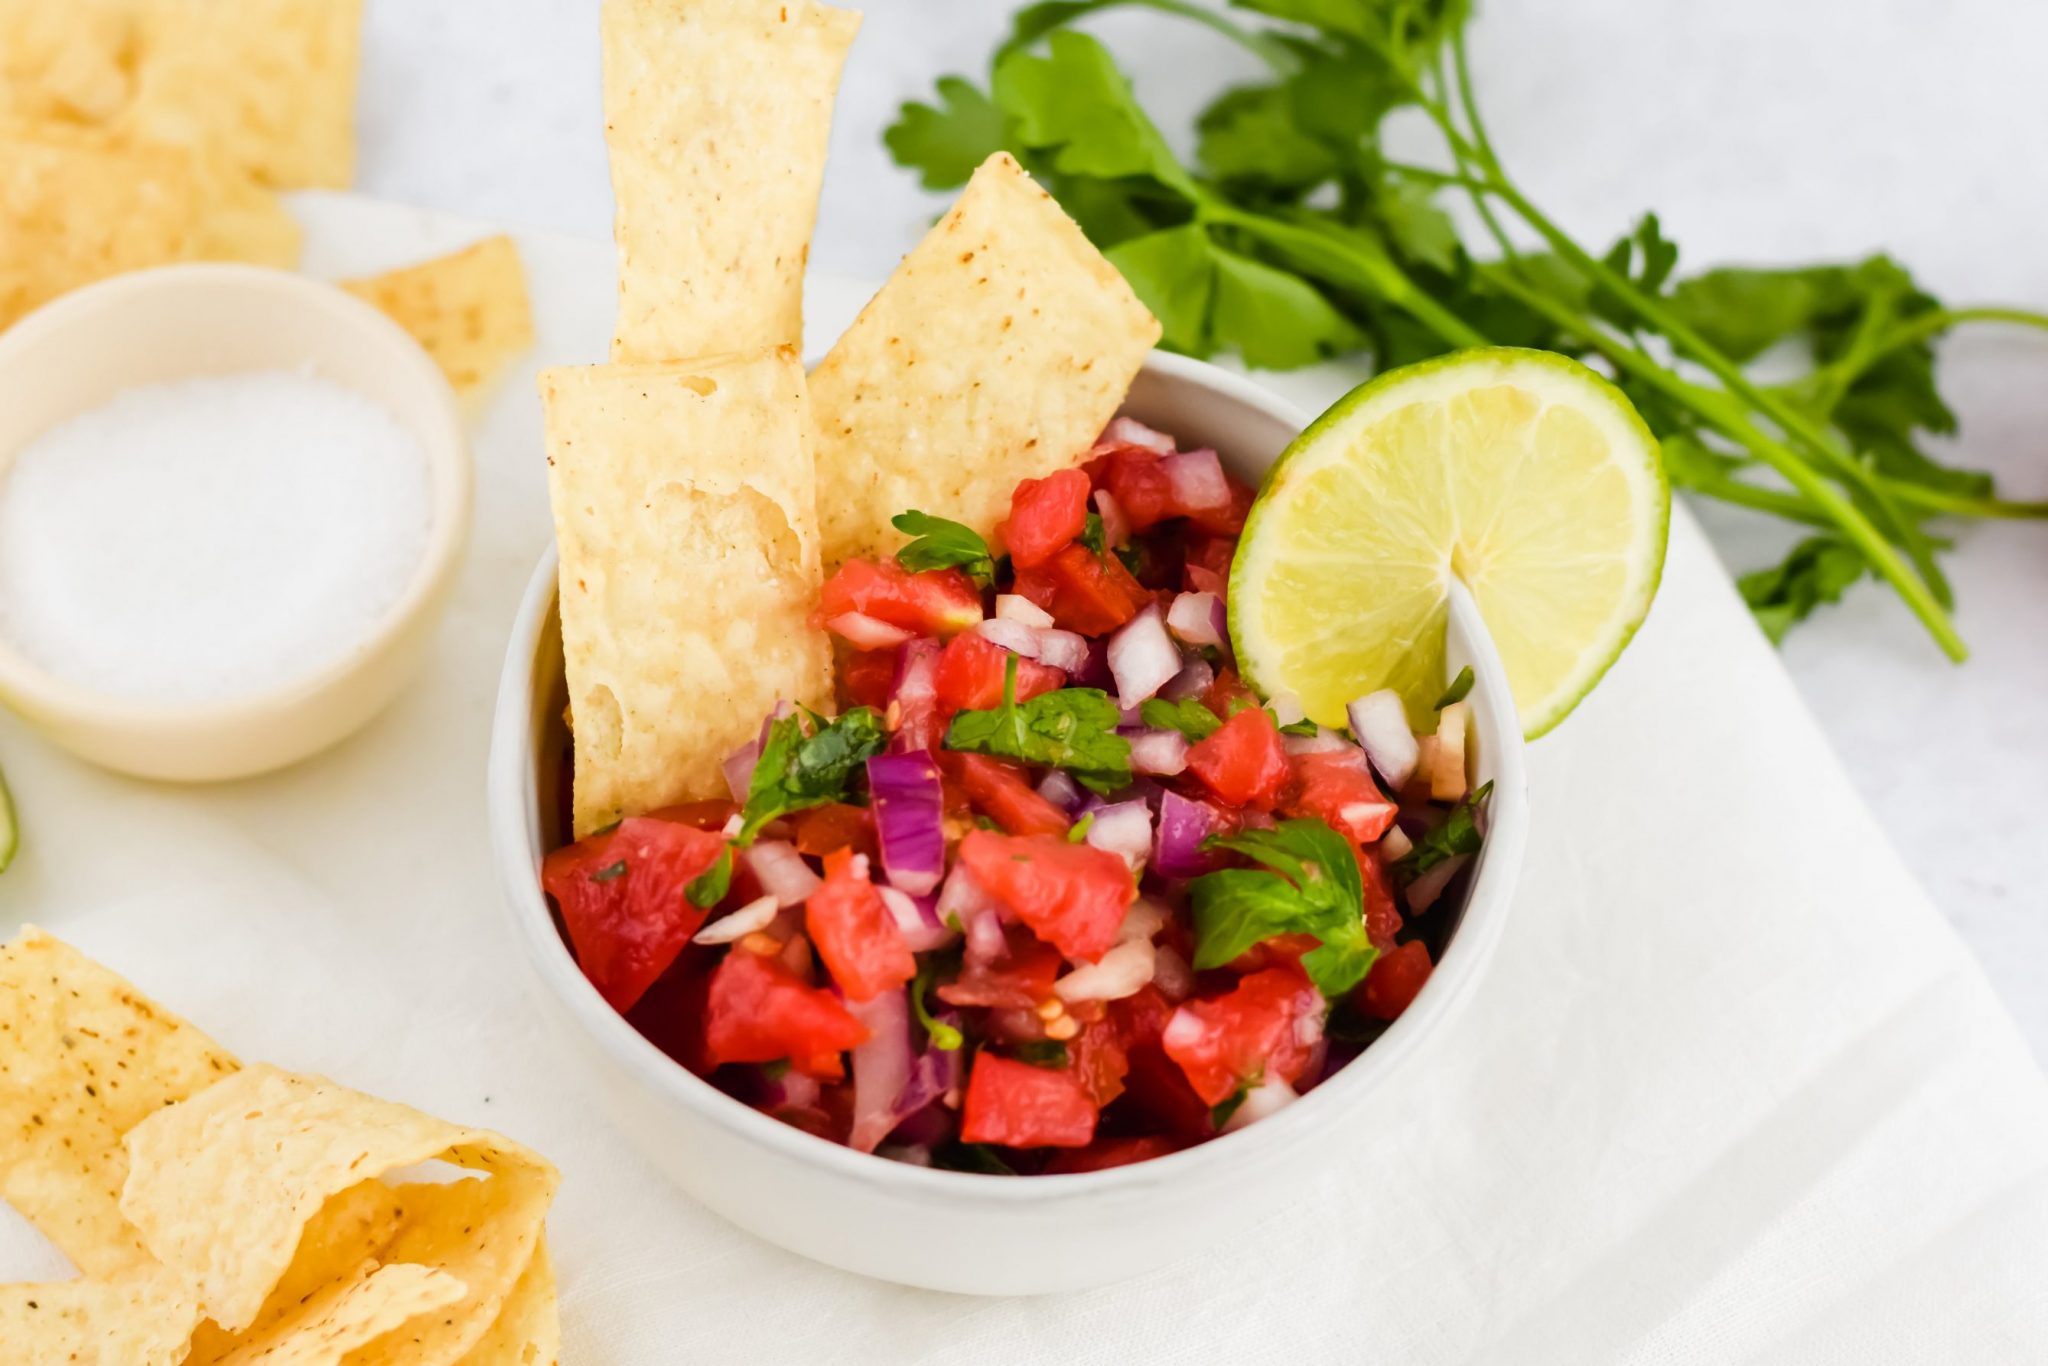 bowl of pico de gallo with fresh cilantro with chips on concrete background